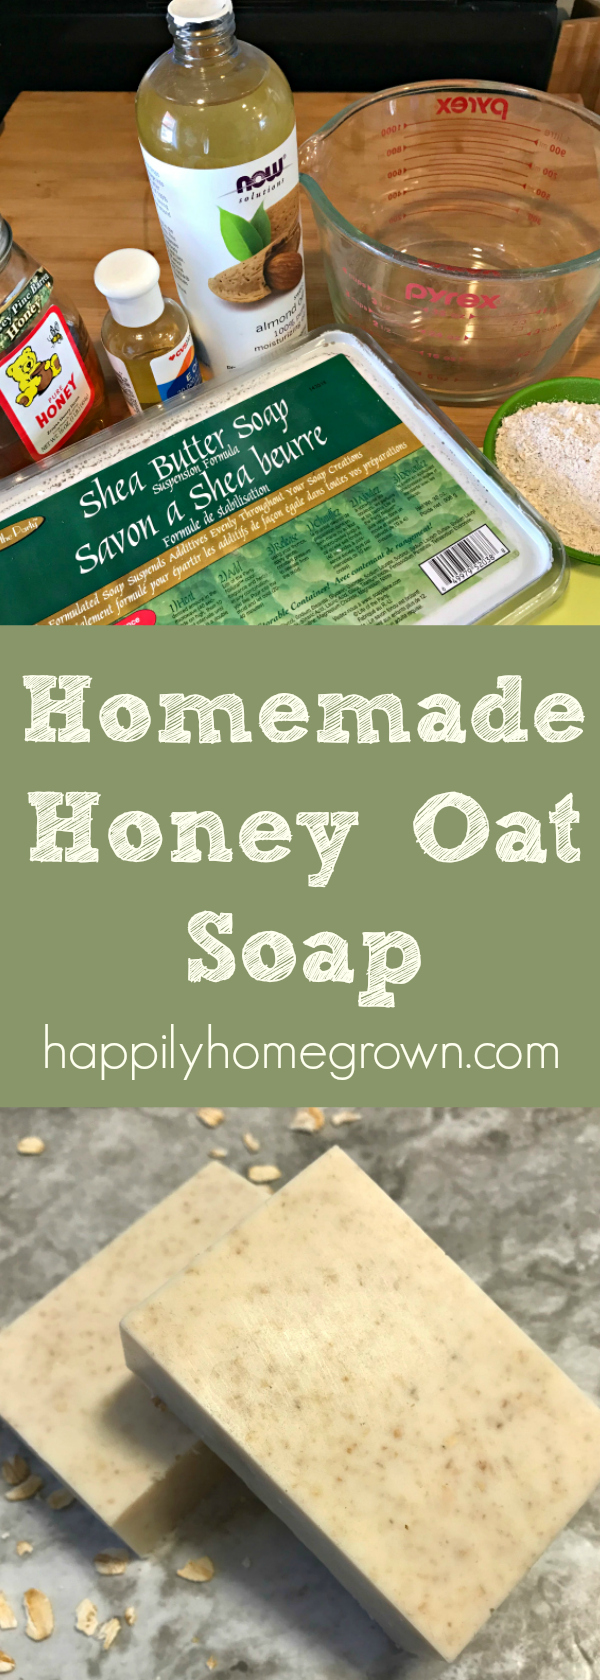 Homemade honey oat soap is the perfect homemade Christmas gift! You can make a batch in as little as 10 minutes. #HandmadeChristmas